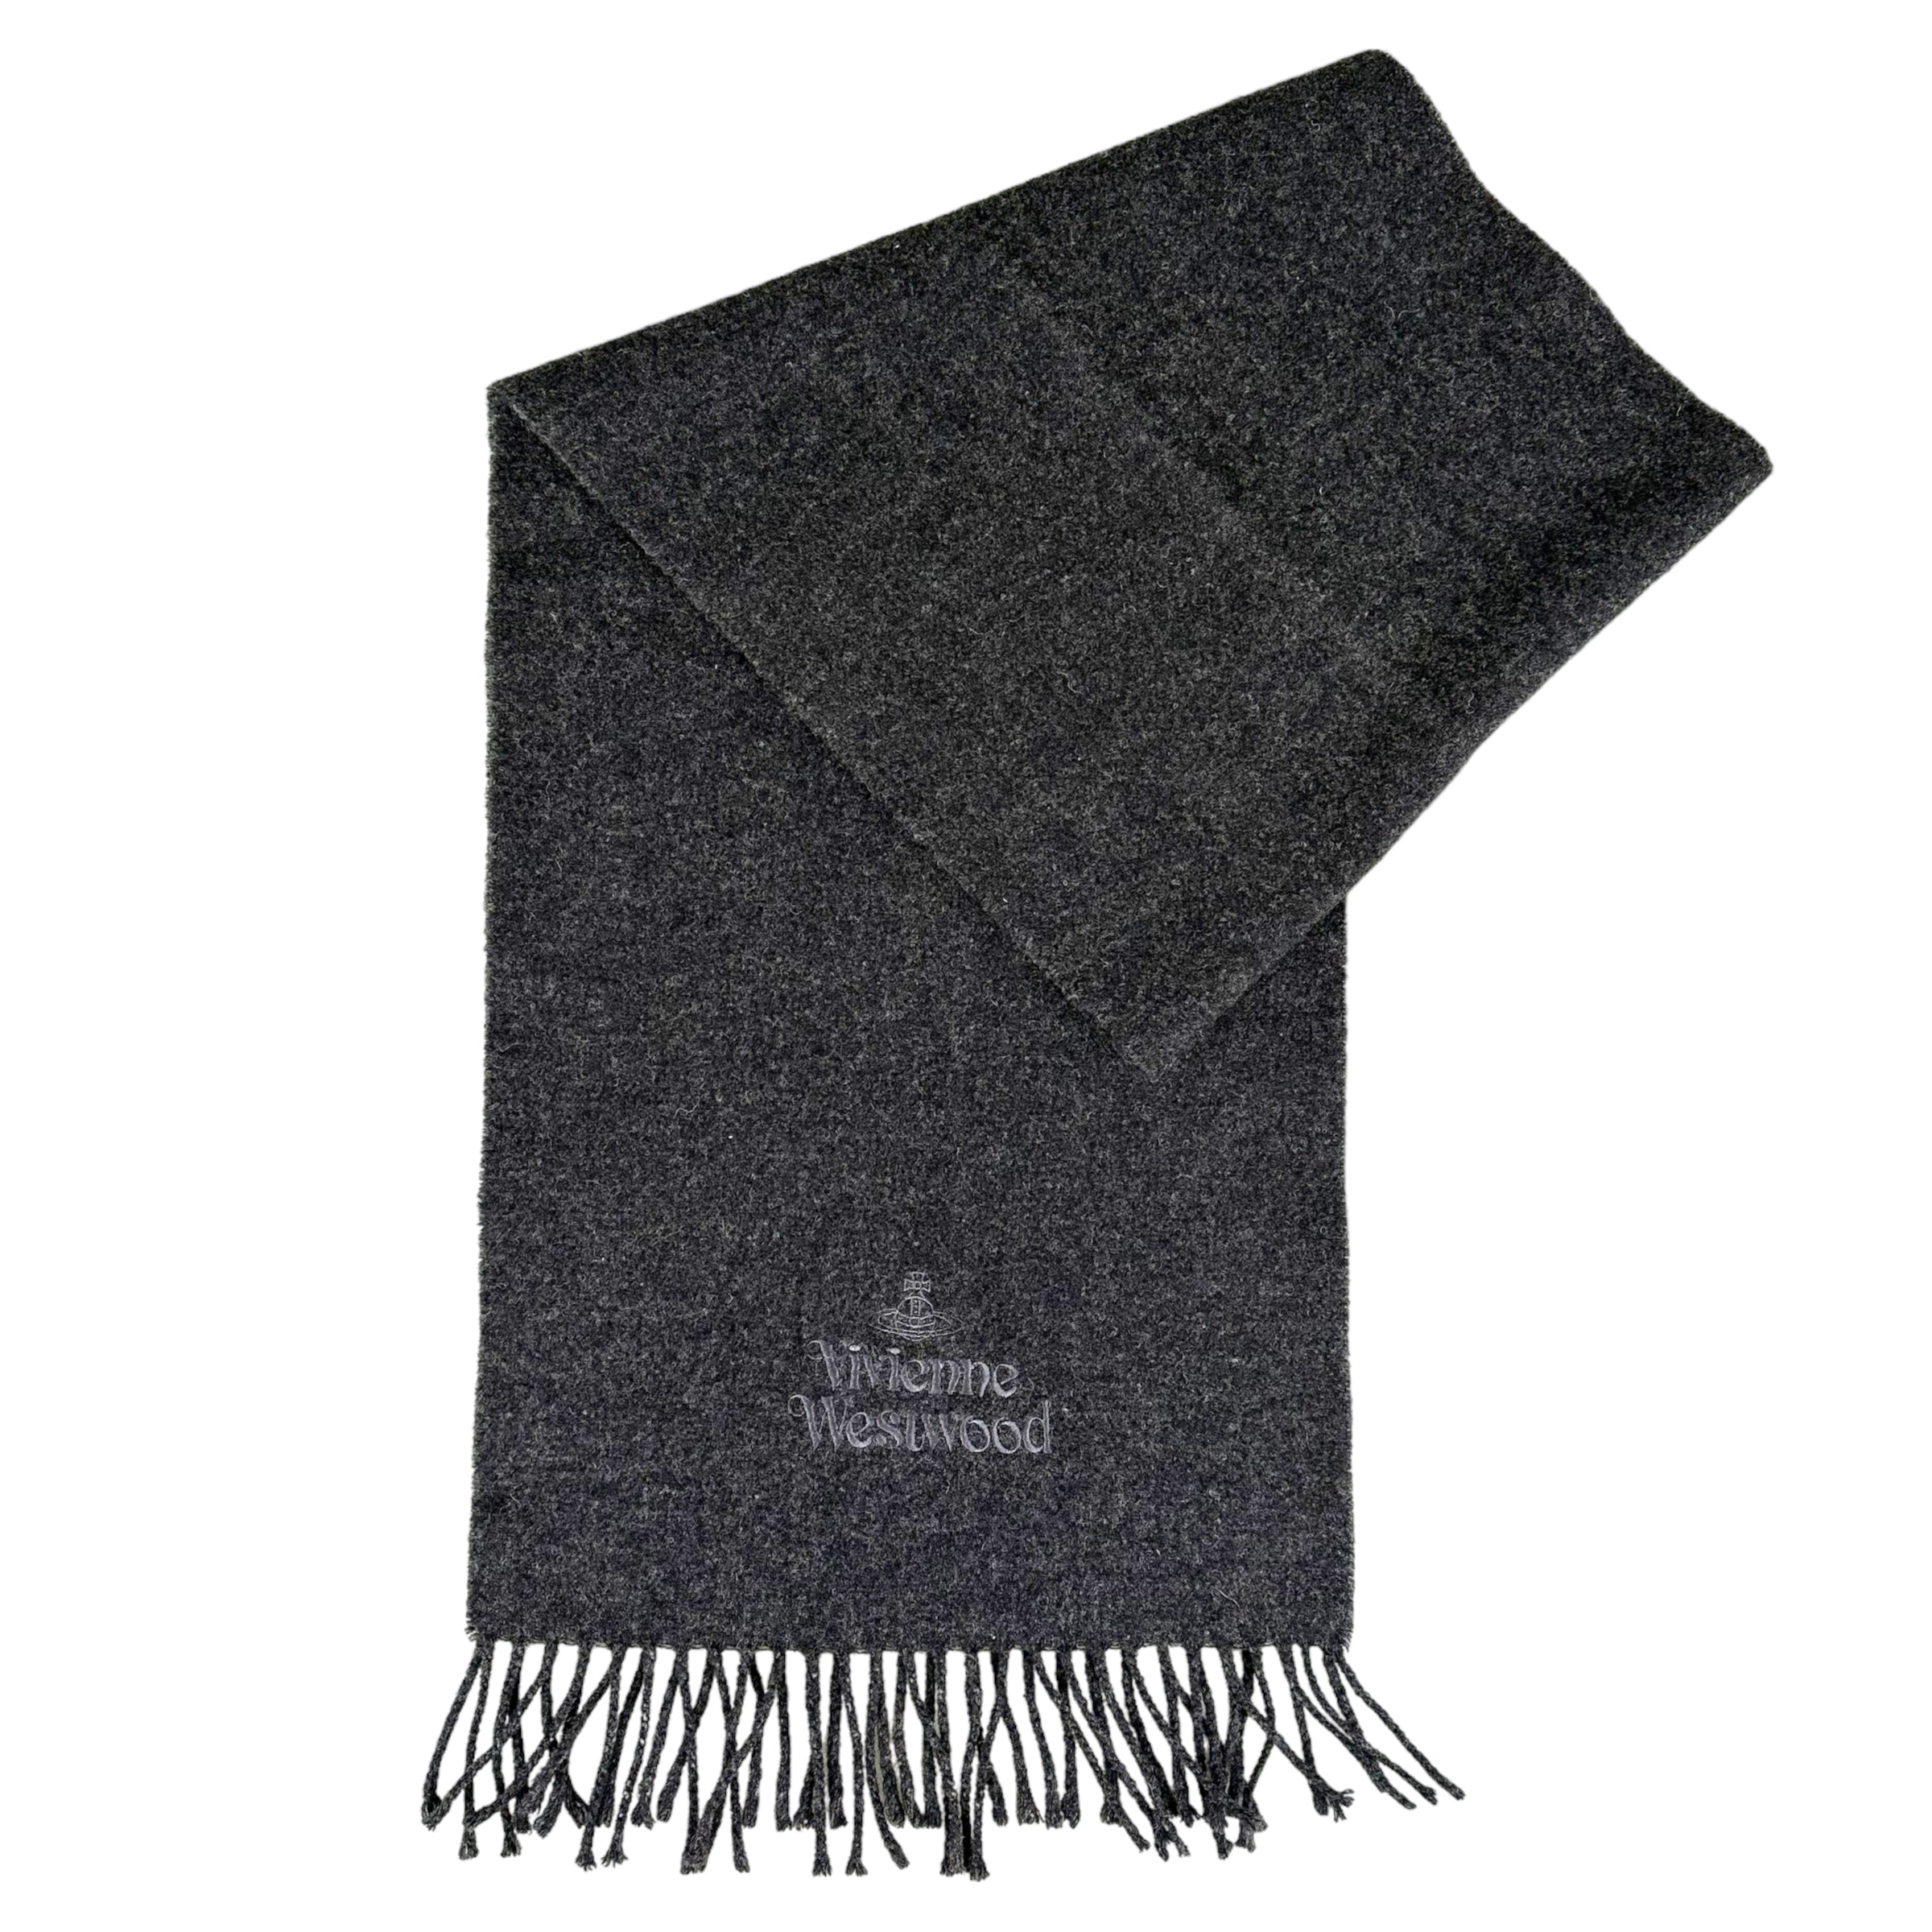 VIVIENNE WESTWOOD EMBROIDERED SCARF